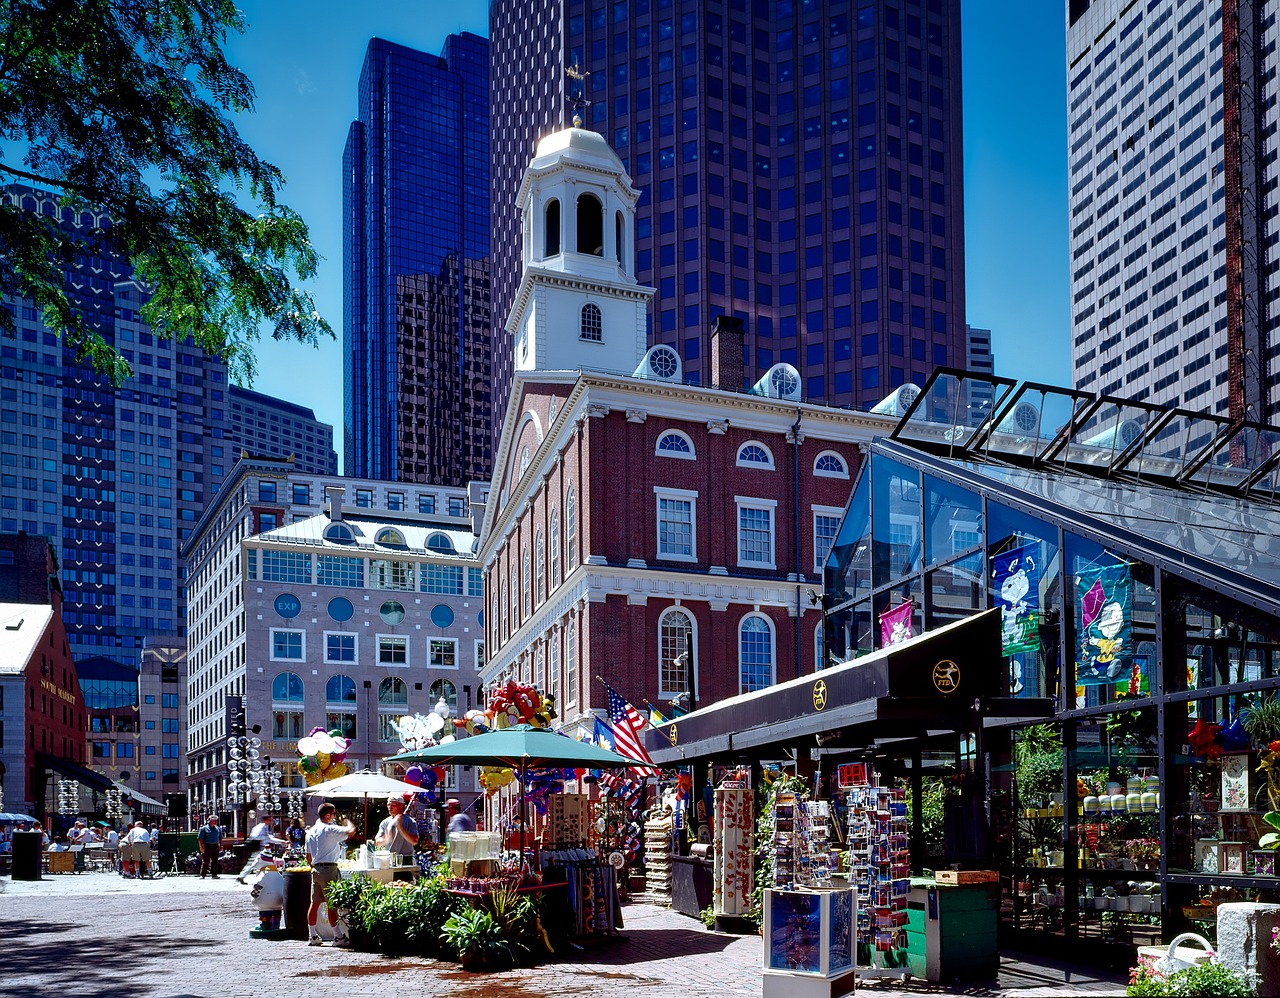 Historic Boston, Parks, and Clam Chowder Delight